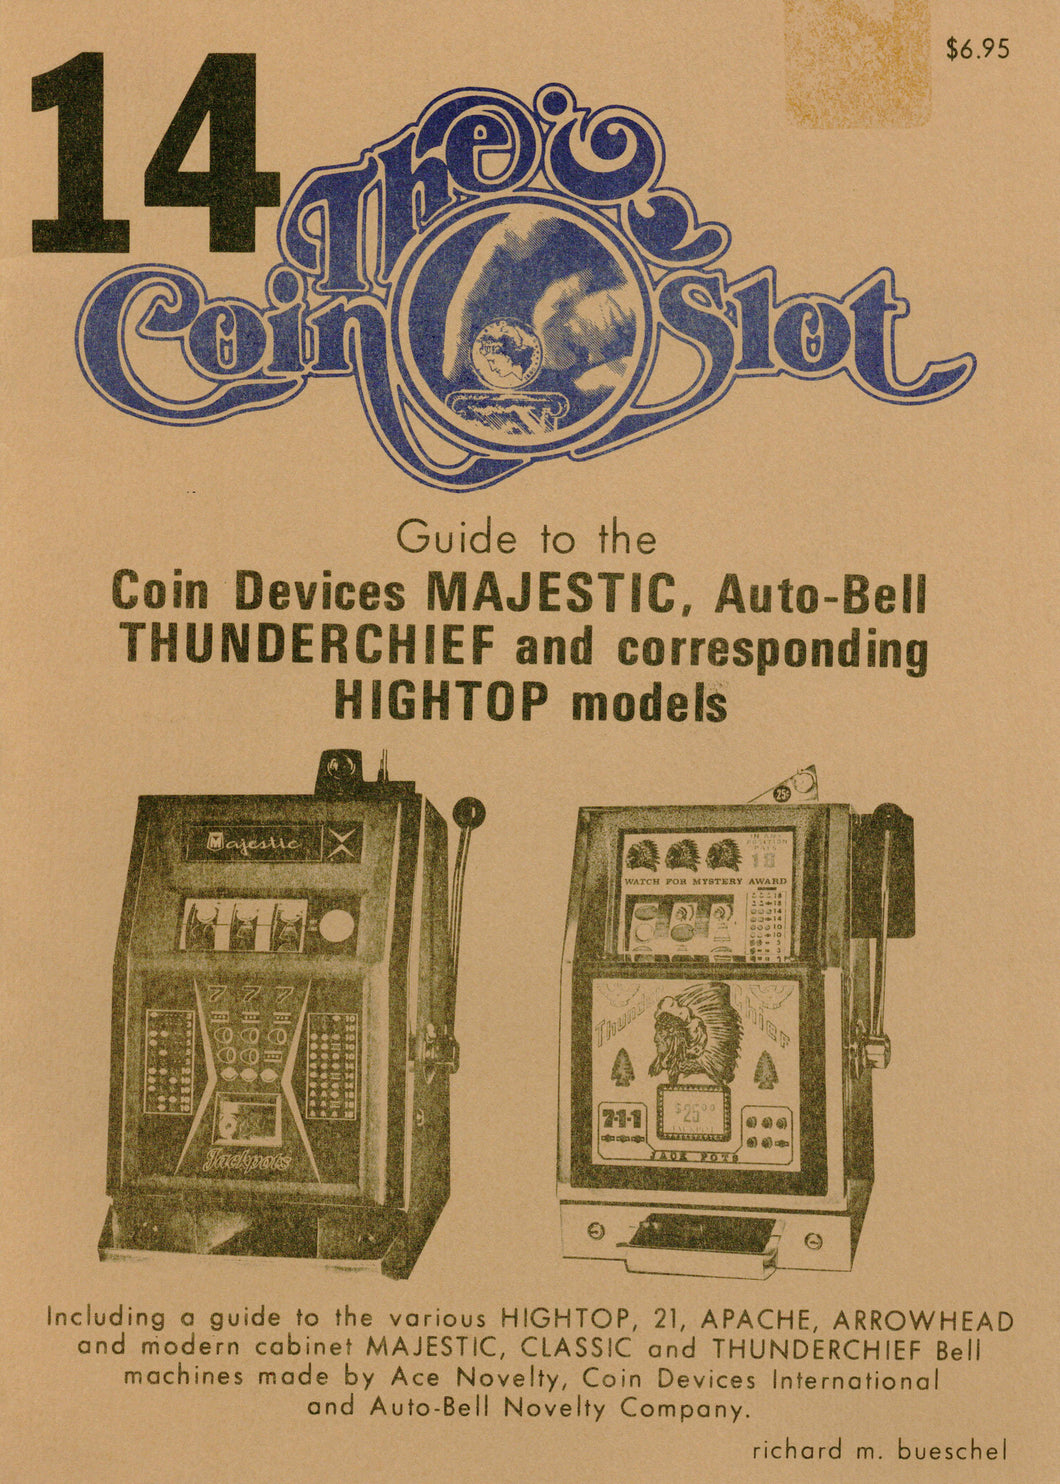 Coin Slot #14. Guide to the Coin Devices Majestic, Auto-Bell Thunderchief and corresponding Hightop models